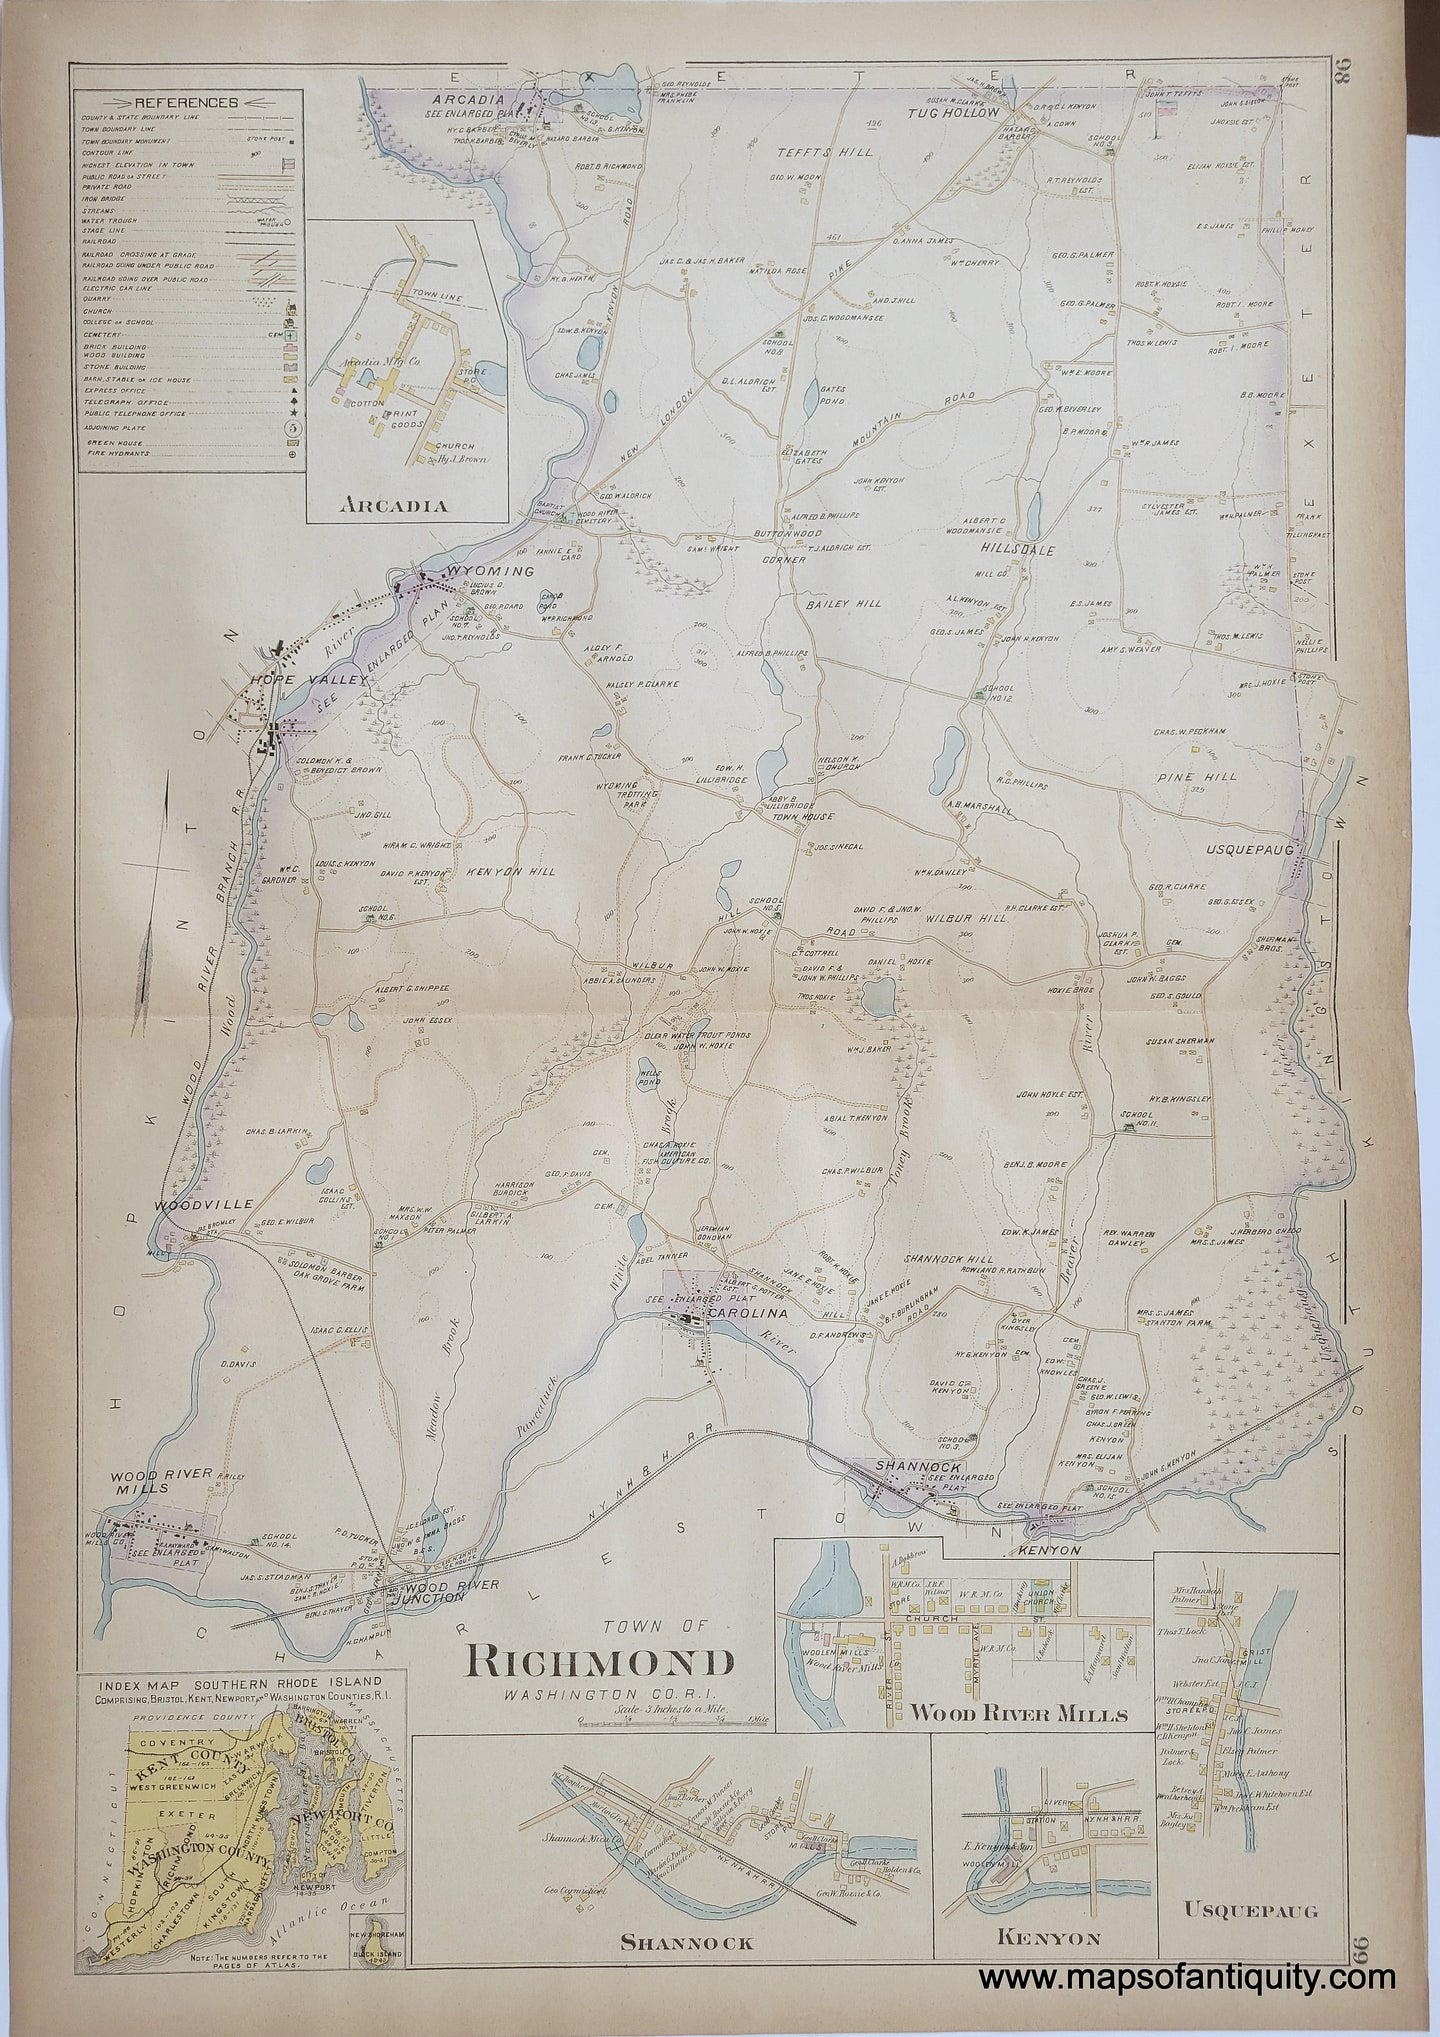 Antique-Hand-Colored-Map-Town-of-Richmond-Arcadia-Wood-River-Mills-Shannock-Kenyon-Usquepaug-United-States-Northeast-1895-Everts-&-Richards-Maps-Of-Antiquity